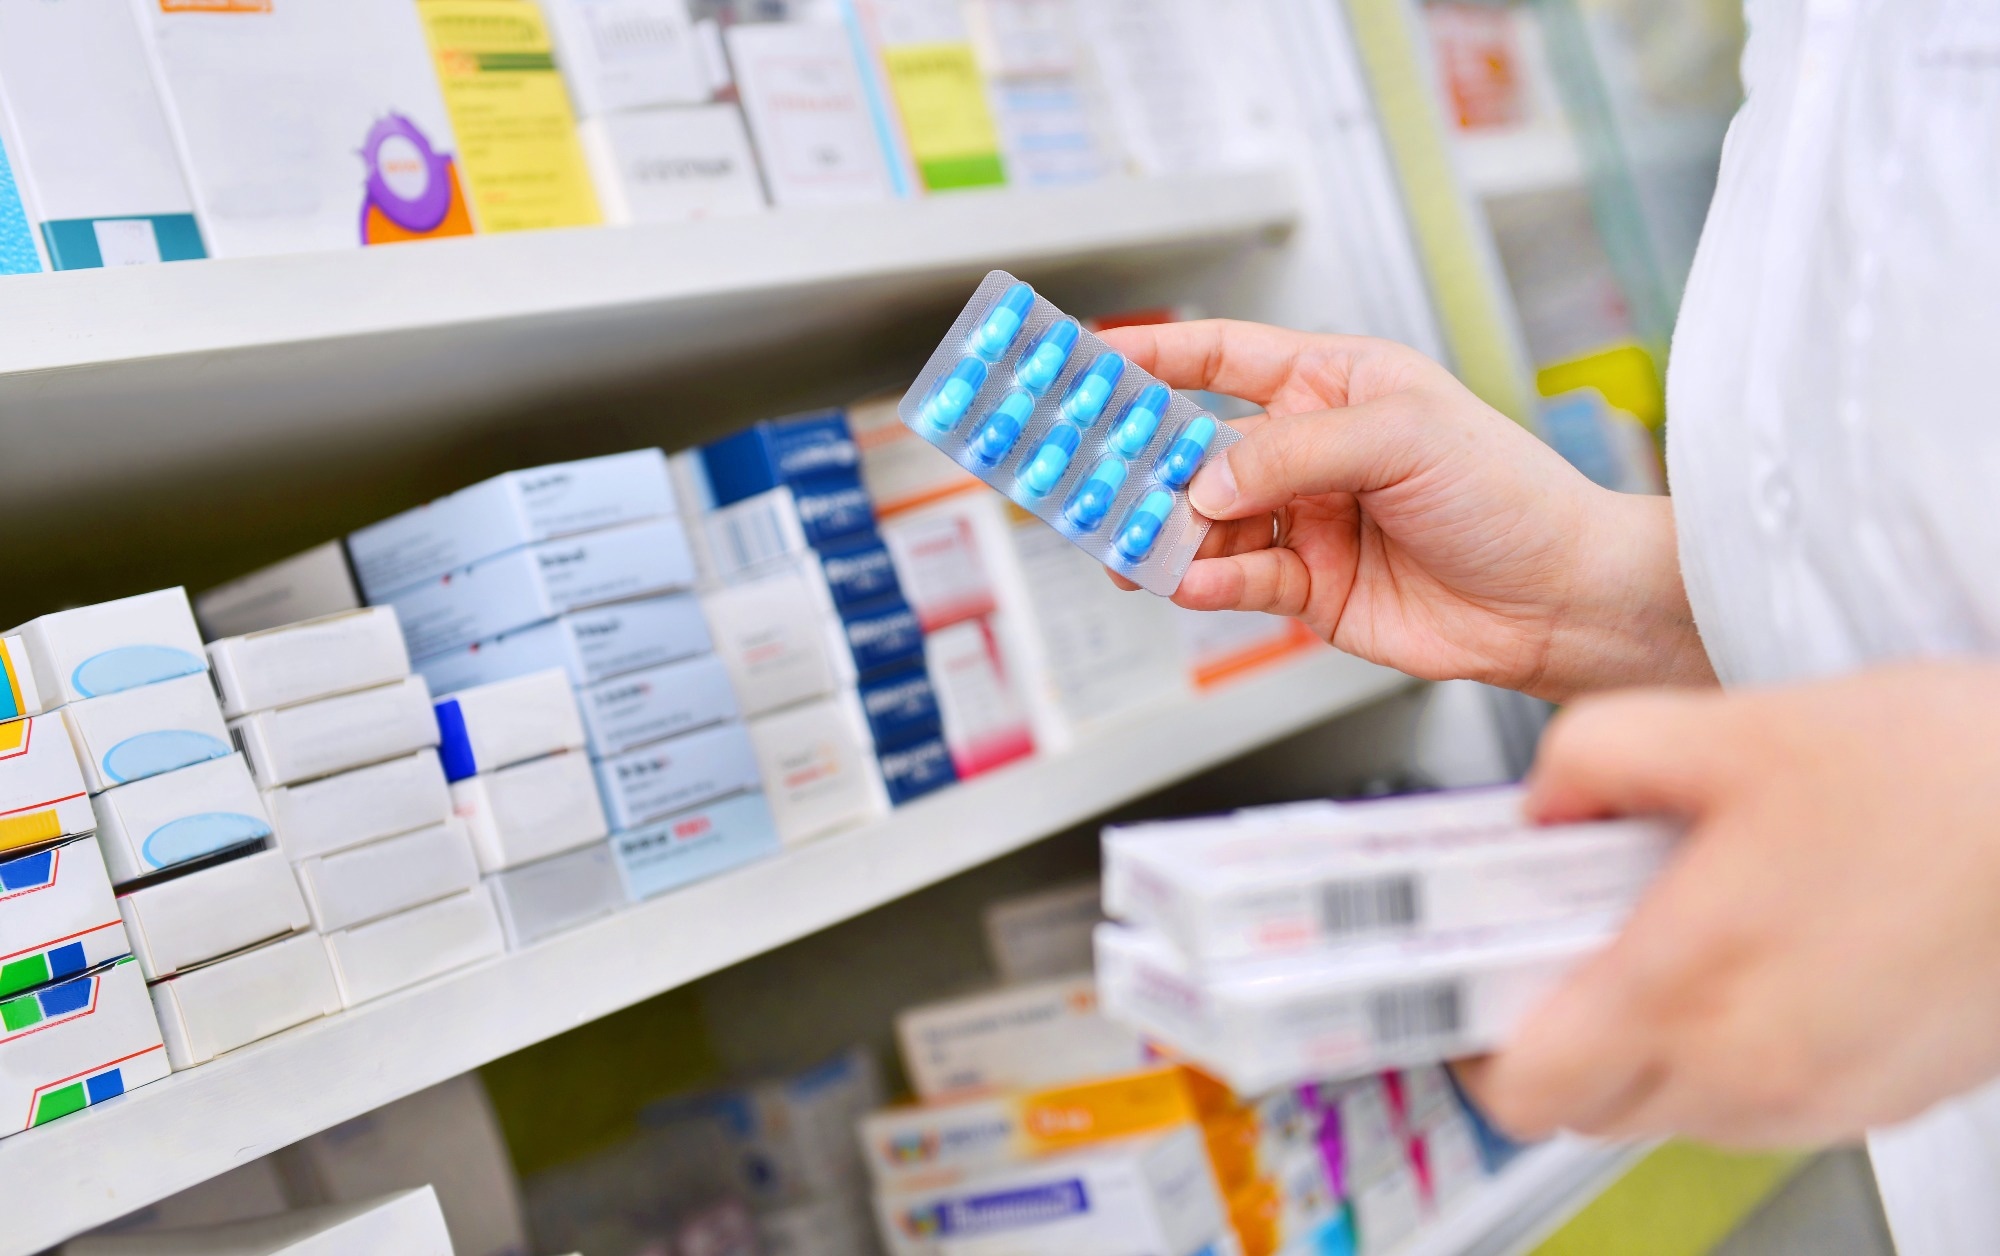 Study: Sustained increases in antibiotic prescriptions per primary care consultation for upper respiratory tract infections in England during the COVID-19 pandemic. Image Credit: i viewfinder / Shutterstock